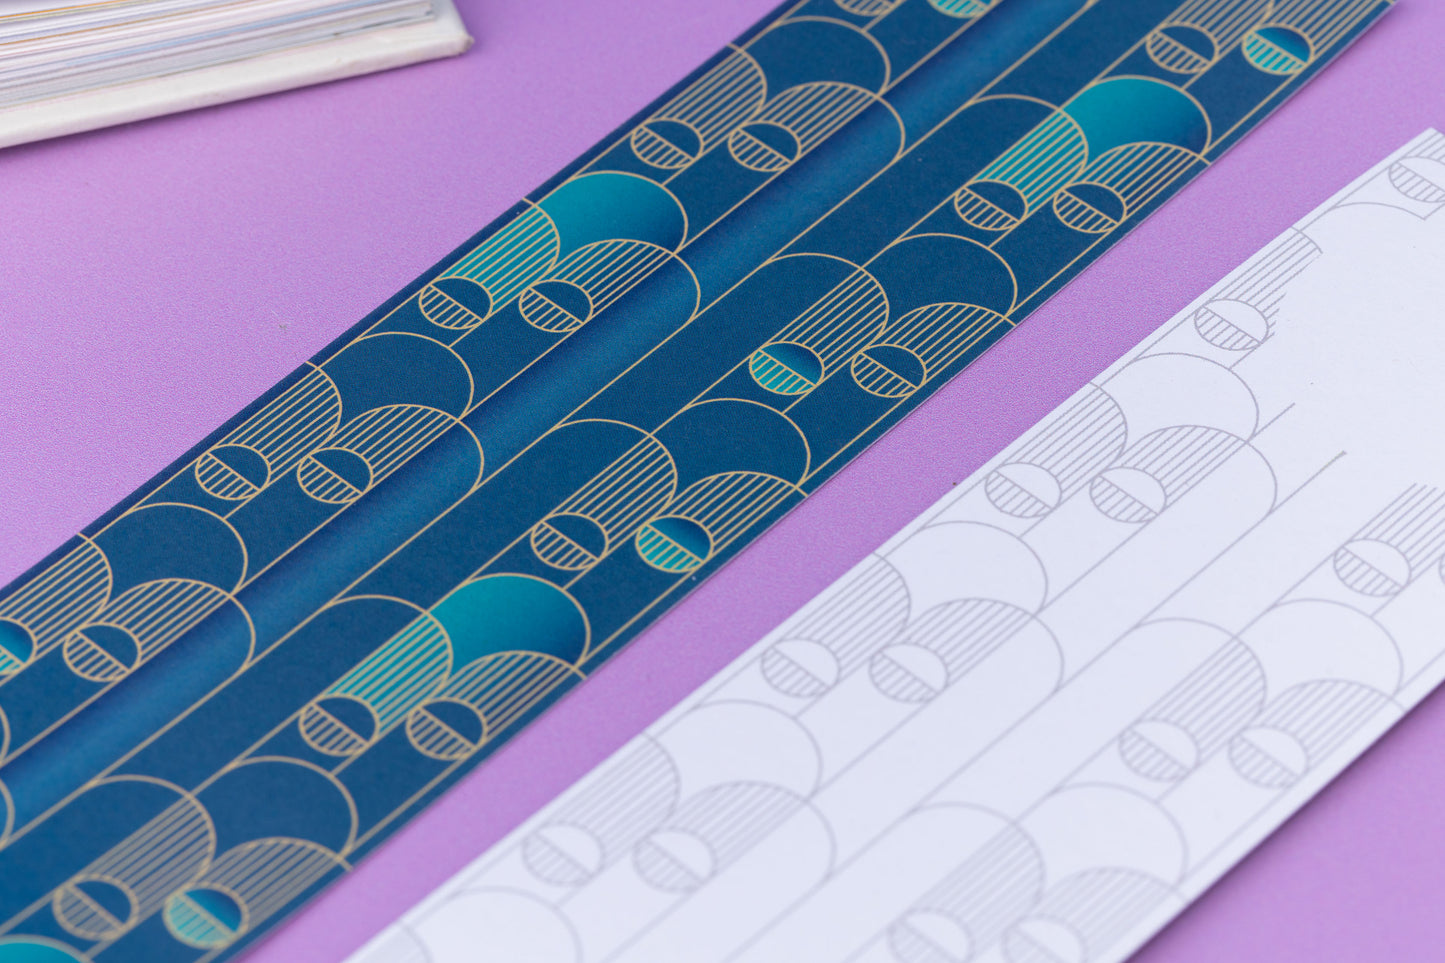 Image of 2 Deco Delights Double sided bookmarks.  One with the full-colour side facing up with the teal gradient and golden yellow deco motif. the other has the monochrome version with the deco motif in a light grey.  They are on a lilac desk with an open book to the top right corner.